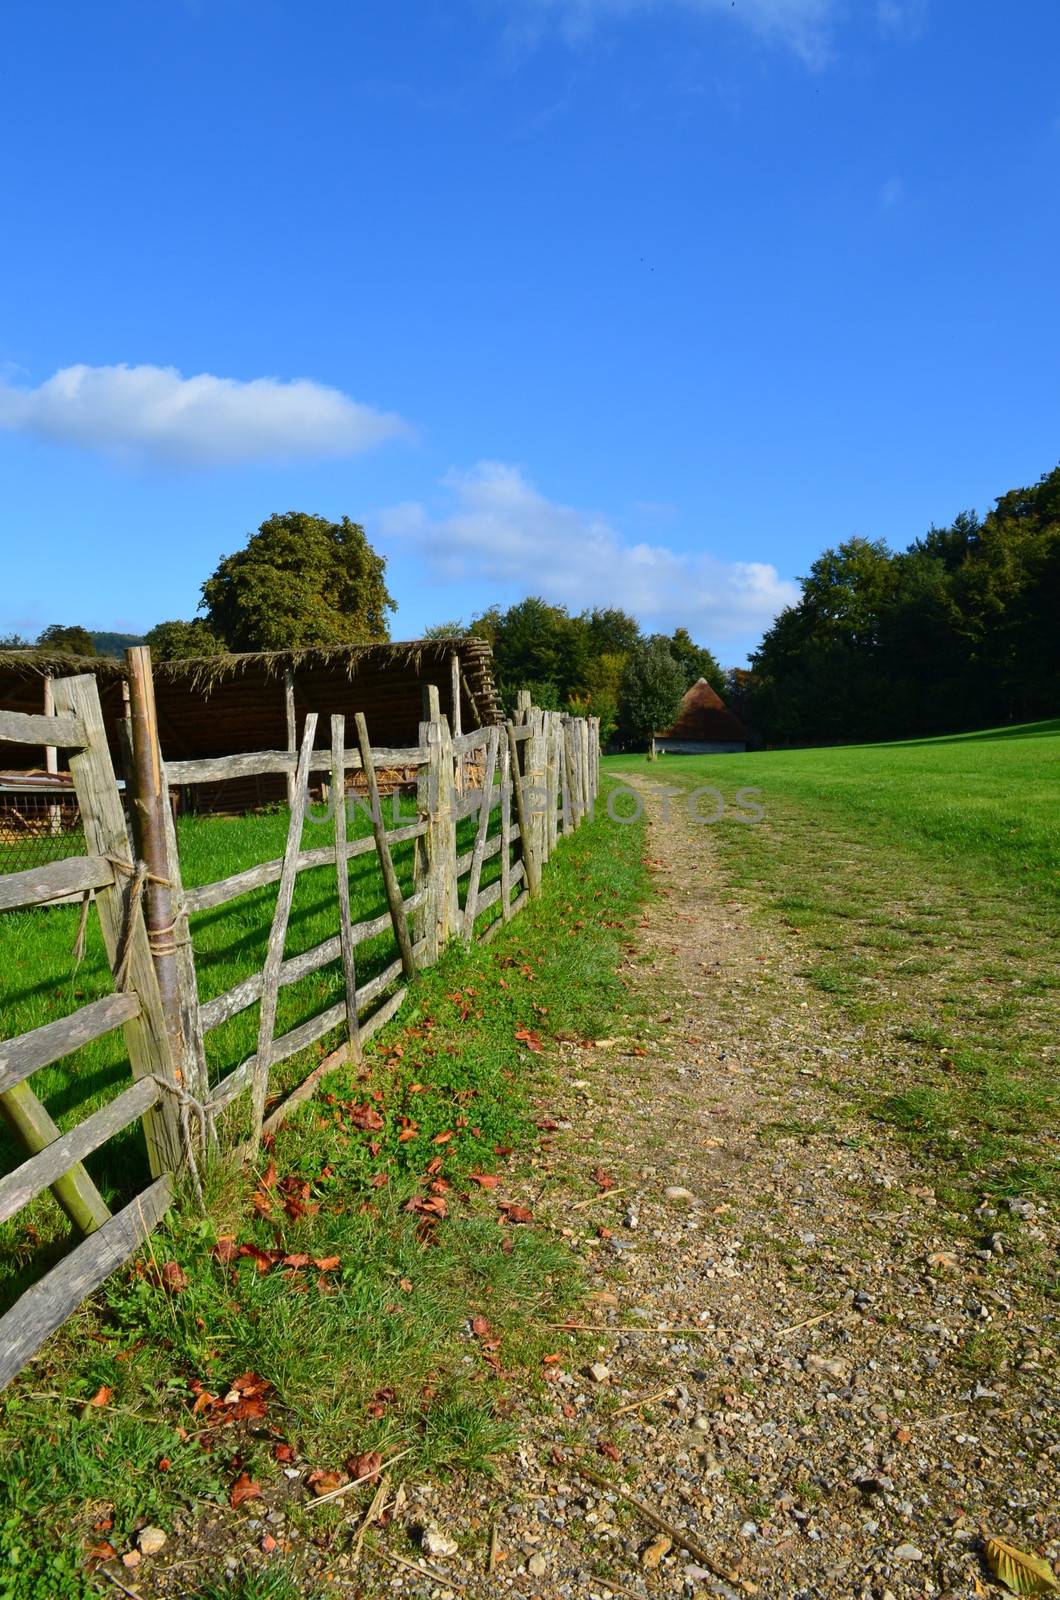 Rustic wooden pasture fencing in the County of Hampshire,England.